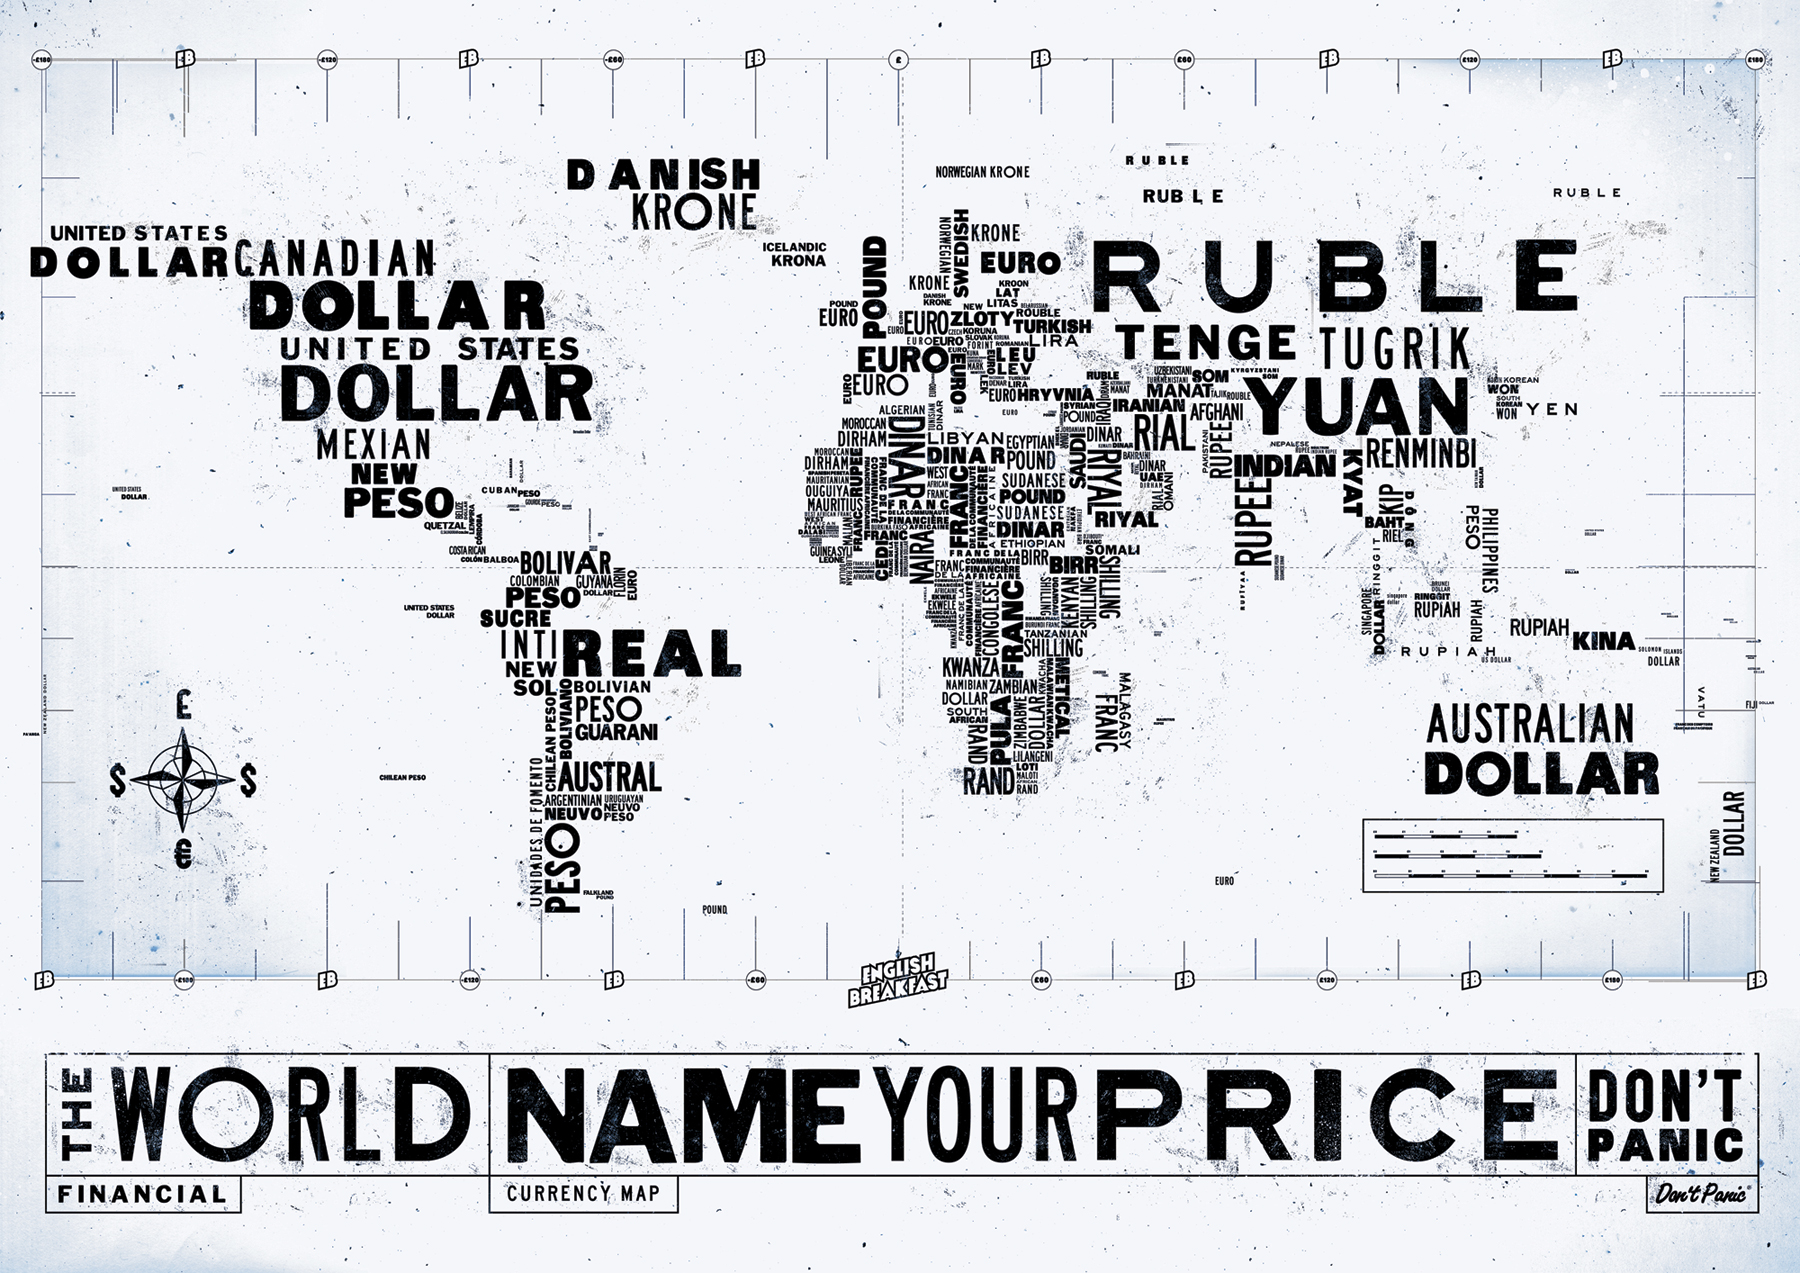 The Worlds Financial State. Just name your price and dont panic.